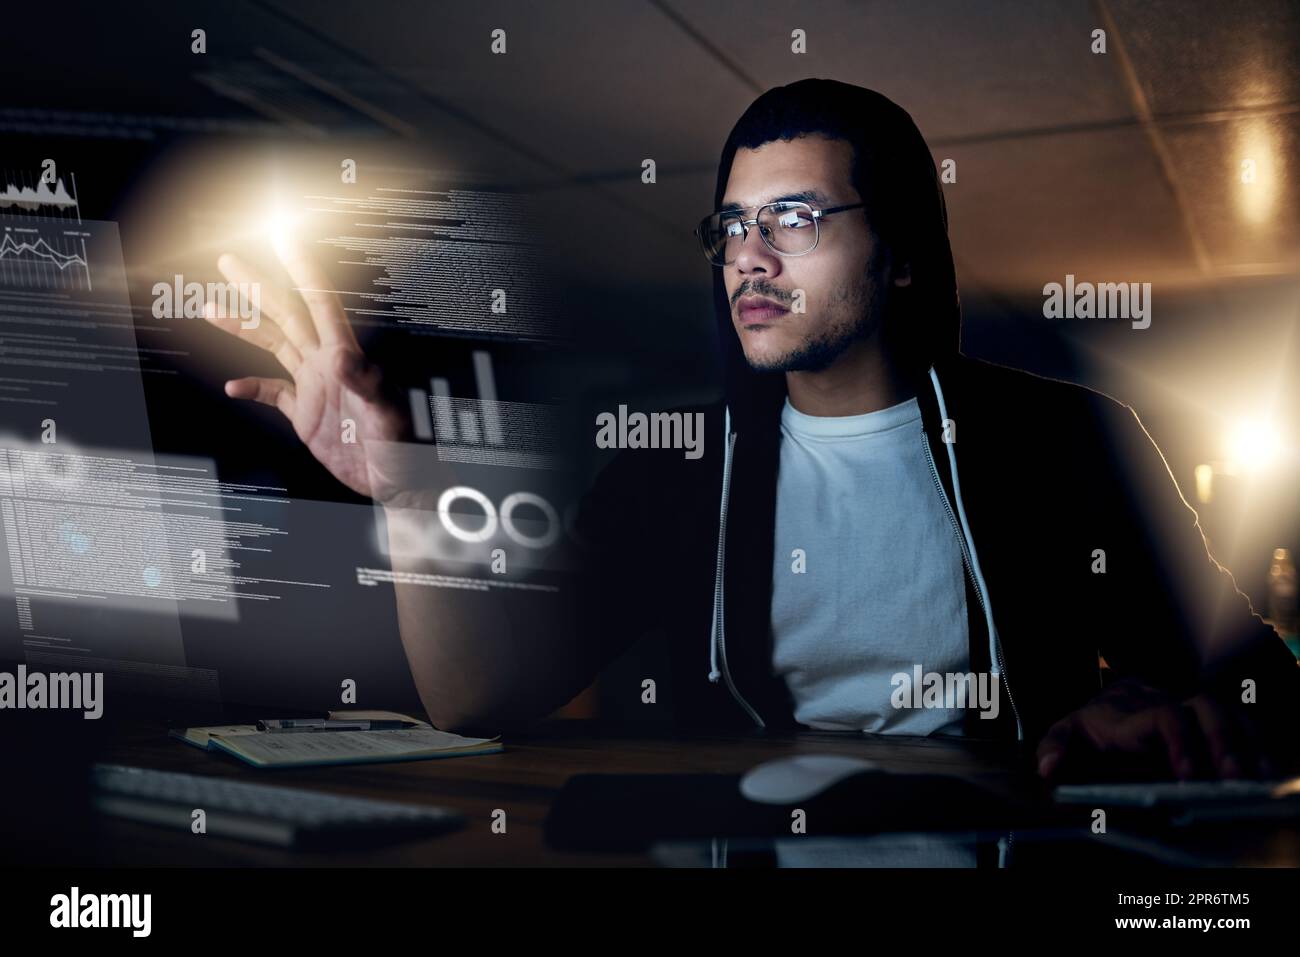 Hacking is a skill that comes second-nature to him. Shot of a young hacker cracking a computer code in the dark. Stock Photo